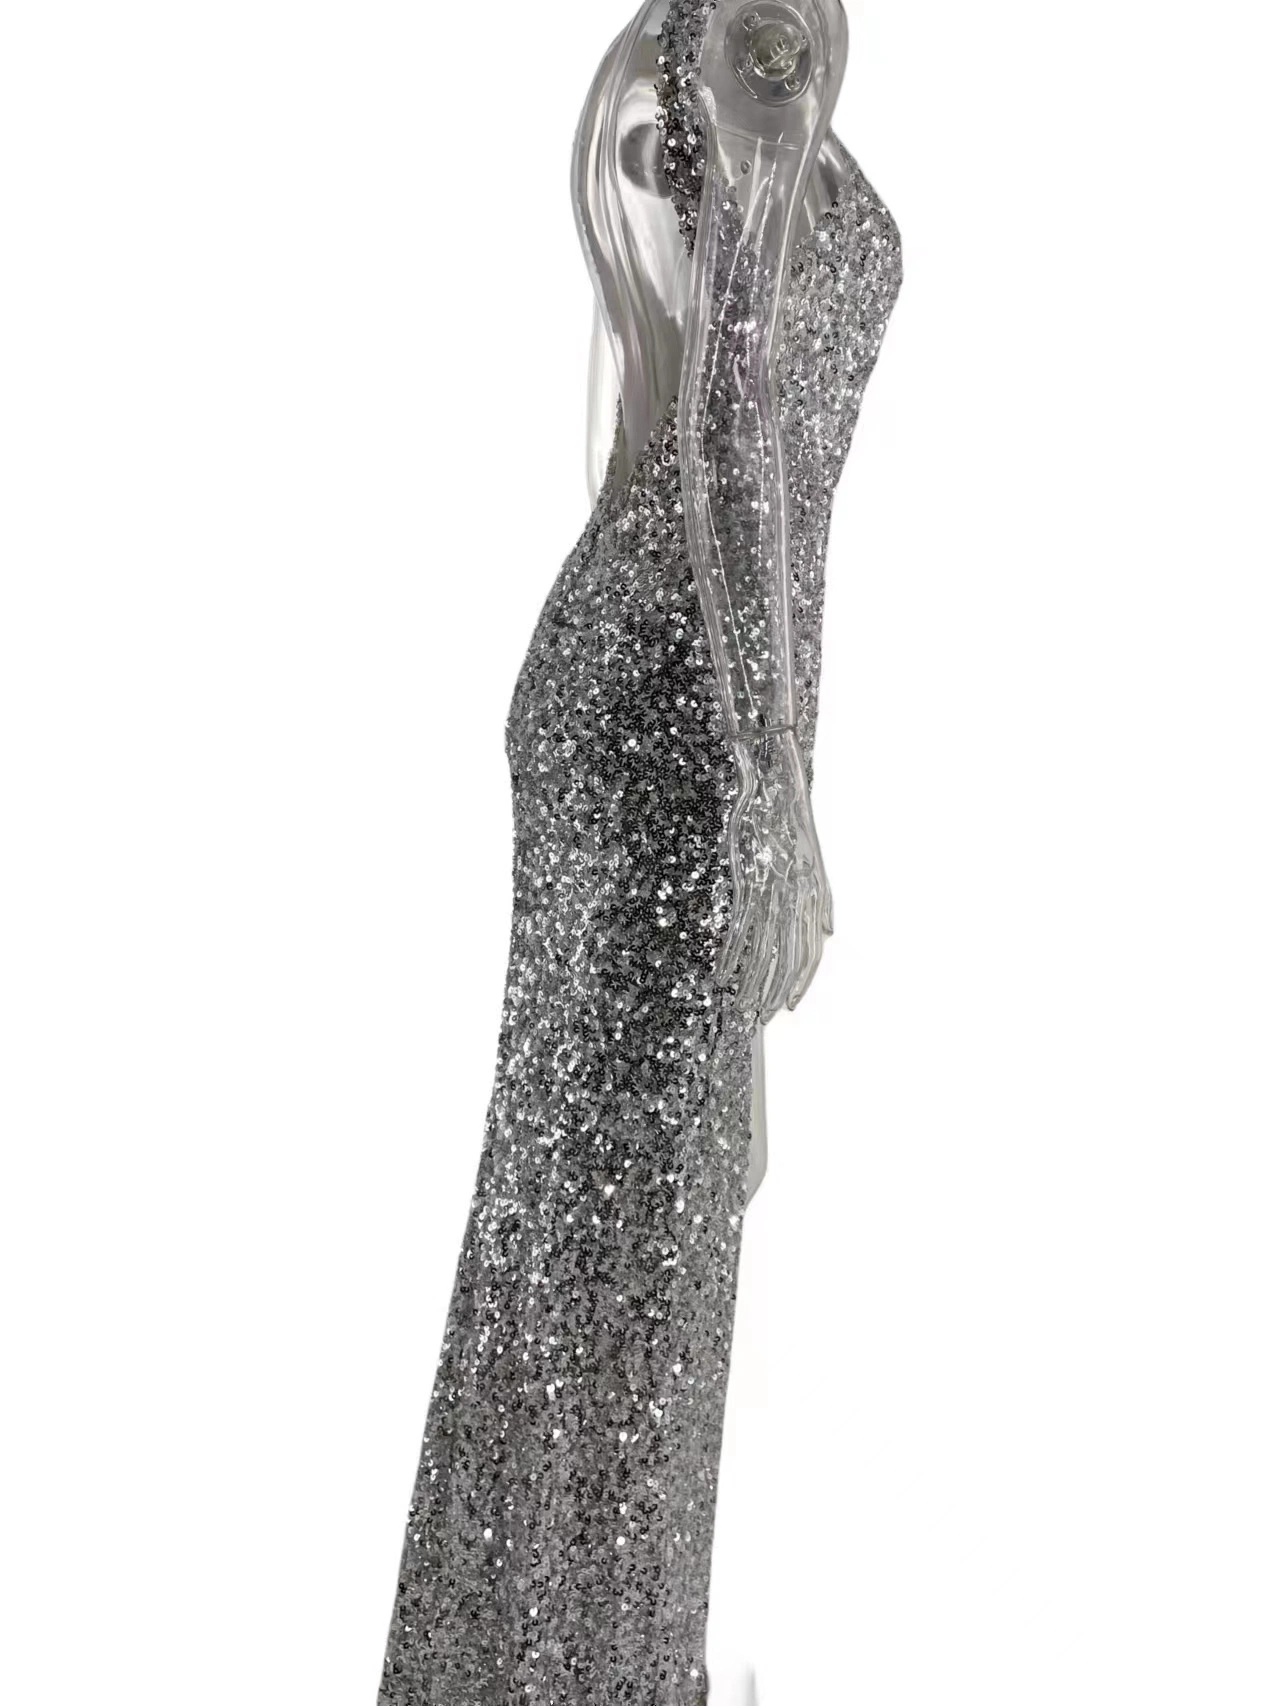 Silver Women's Split Backless Evening Dress Lady Fashion Sexy Long Party Gown